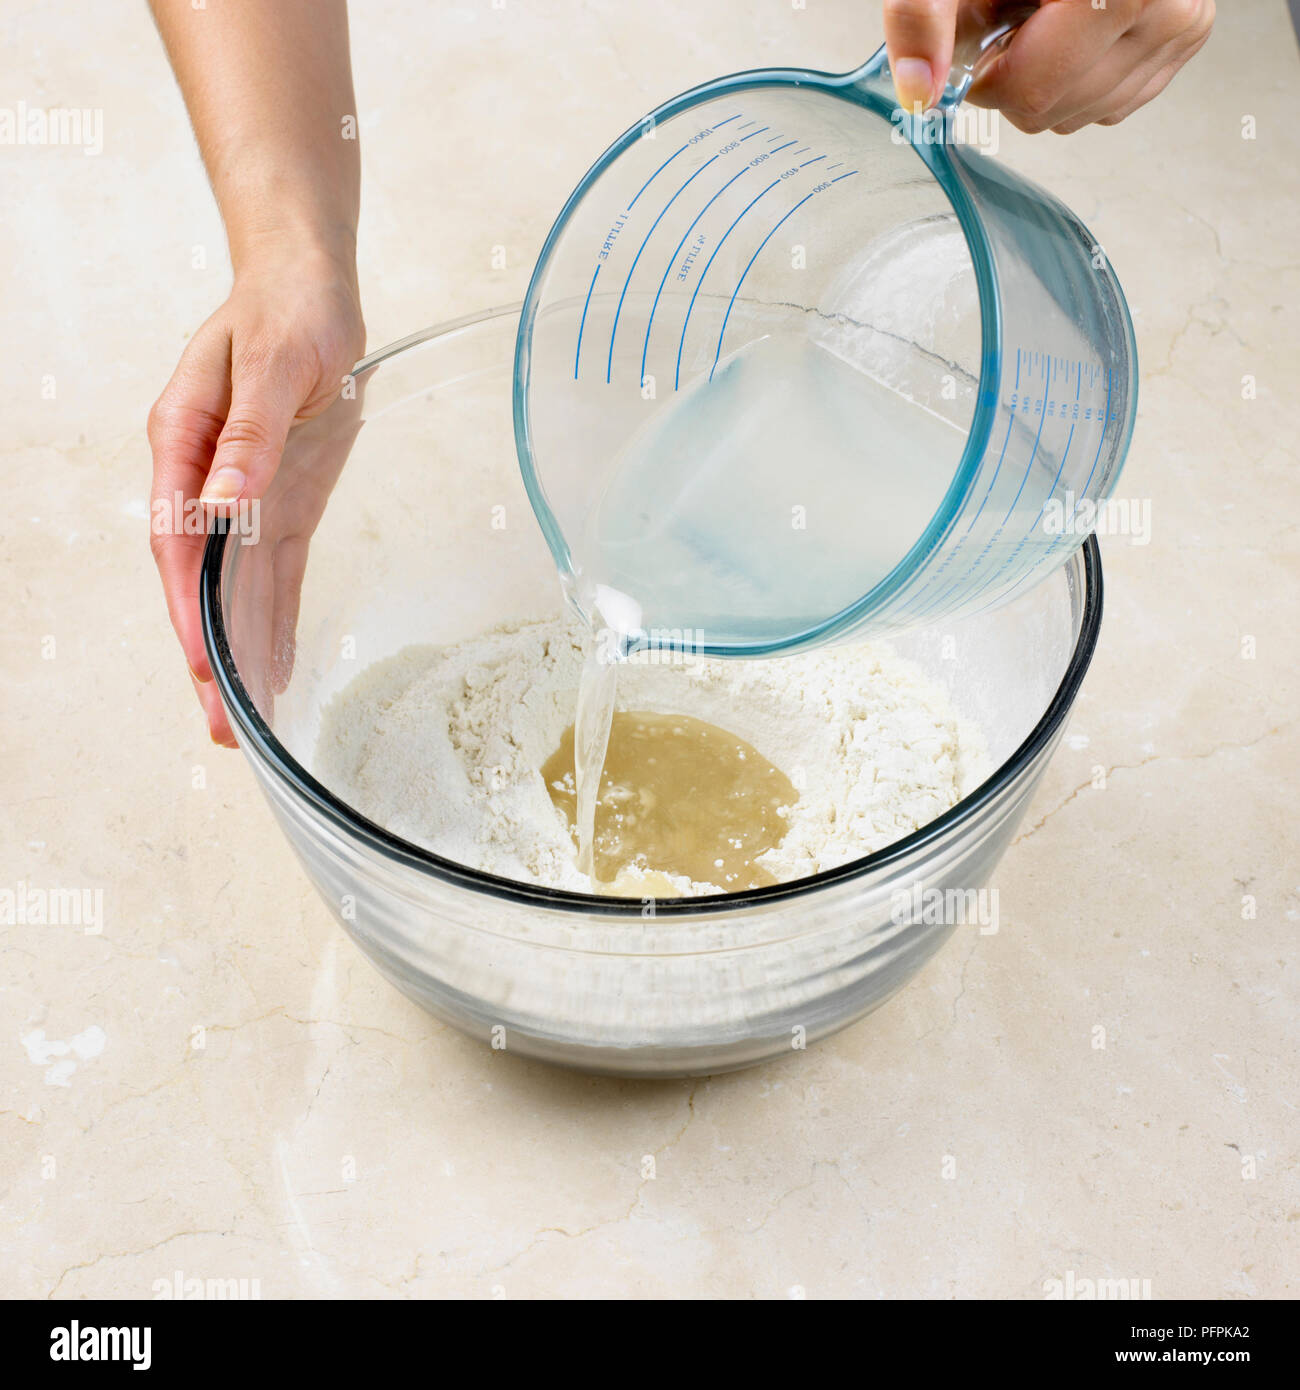 Making hot-water crust pastry, pouring hot melted fat mixture into well in centre of flour mixture Stock Photo